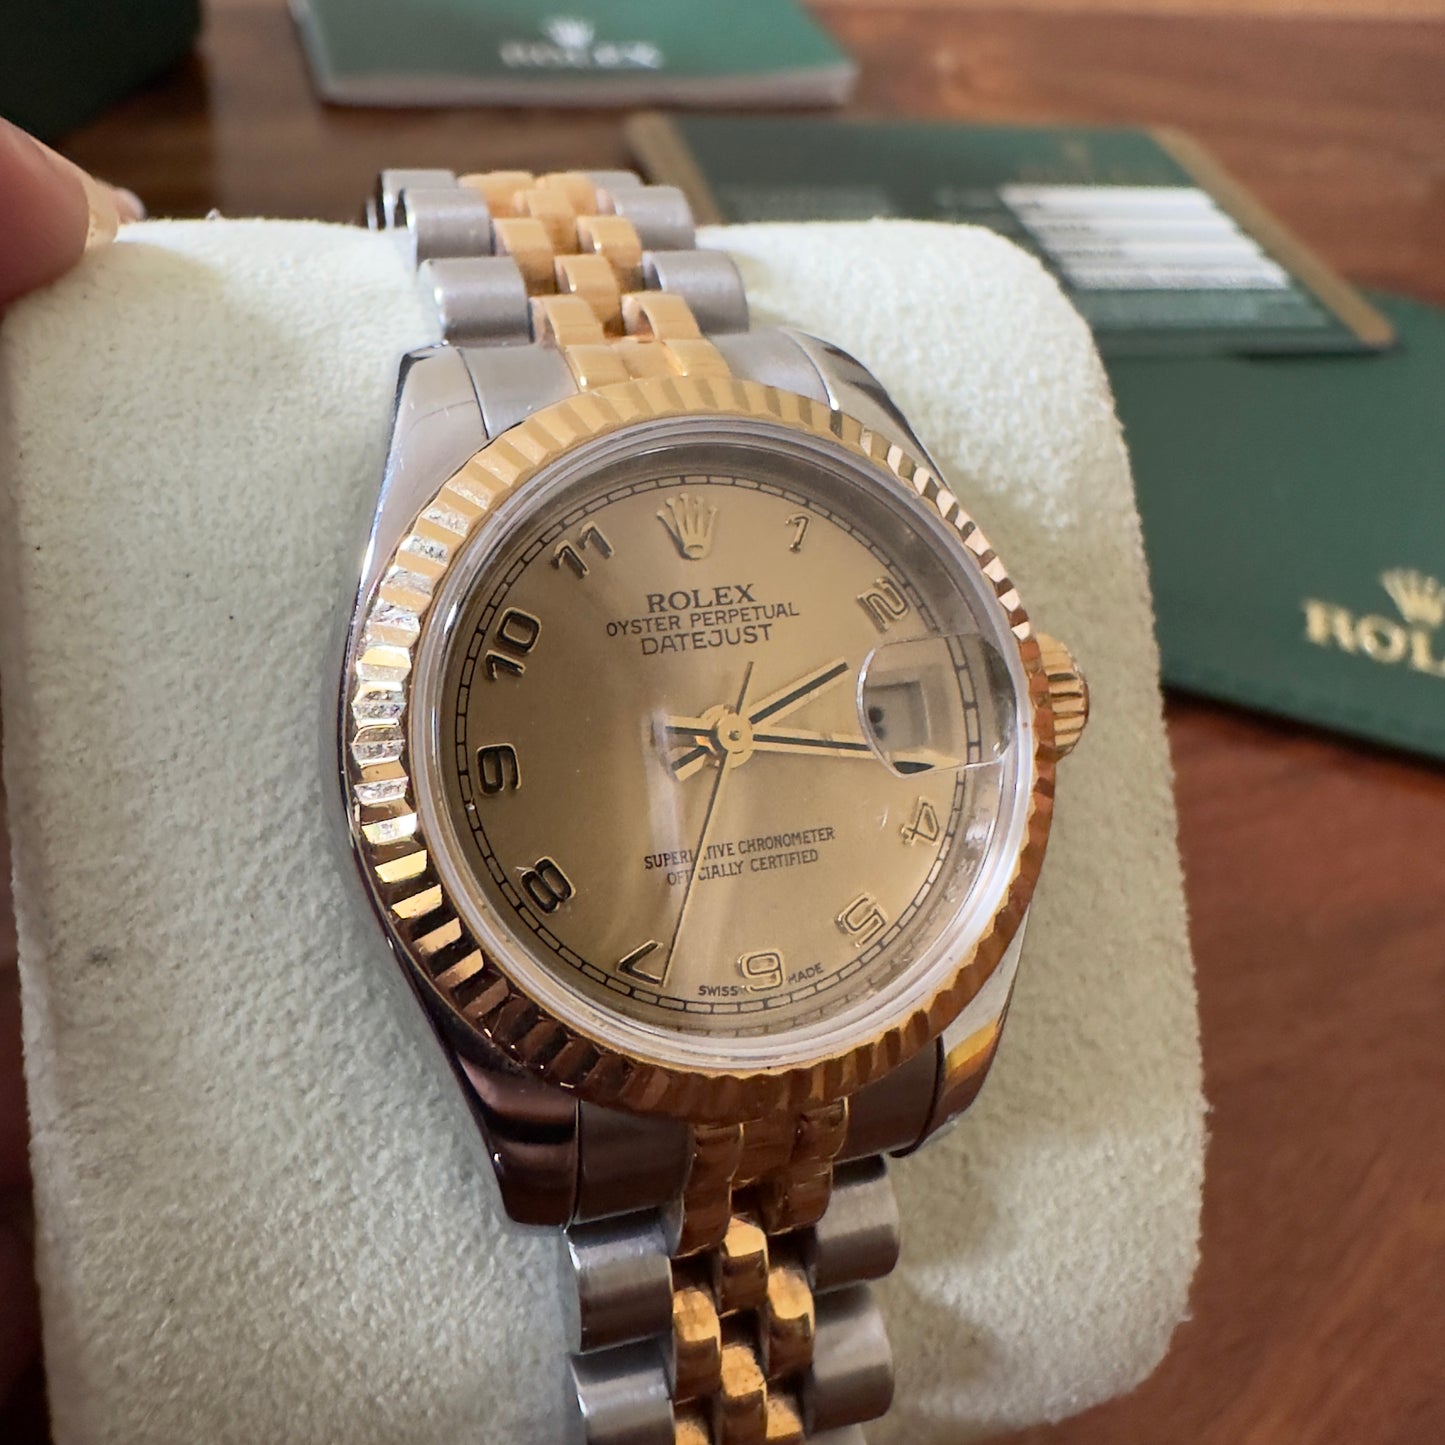 Rolex Datejust 26mm in Stainless Steel and Gold